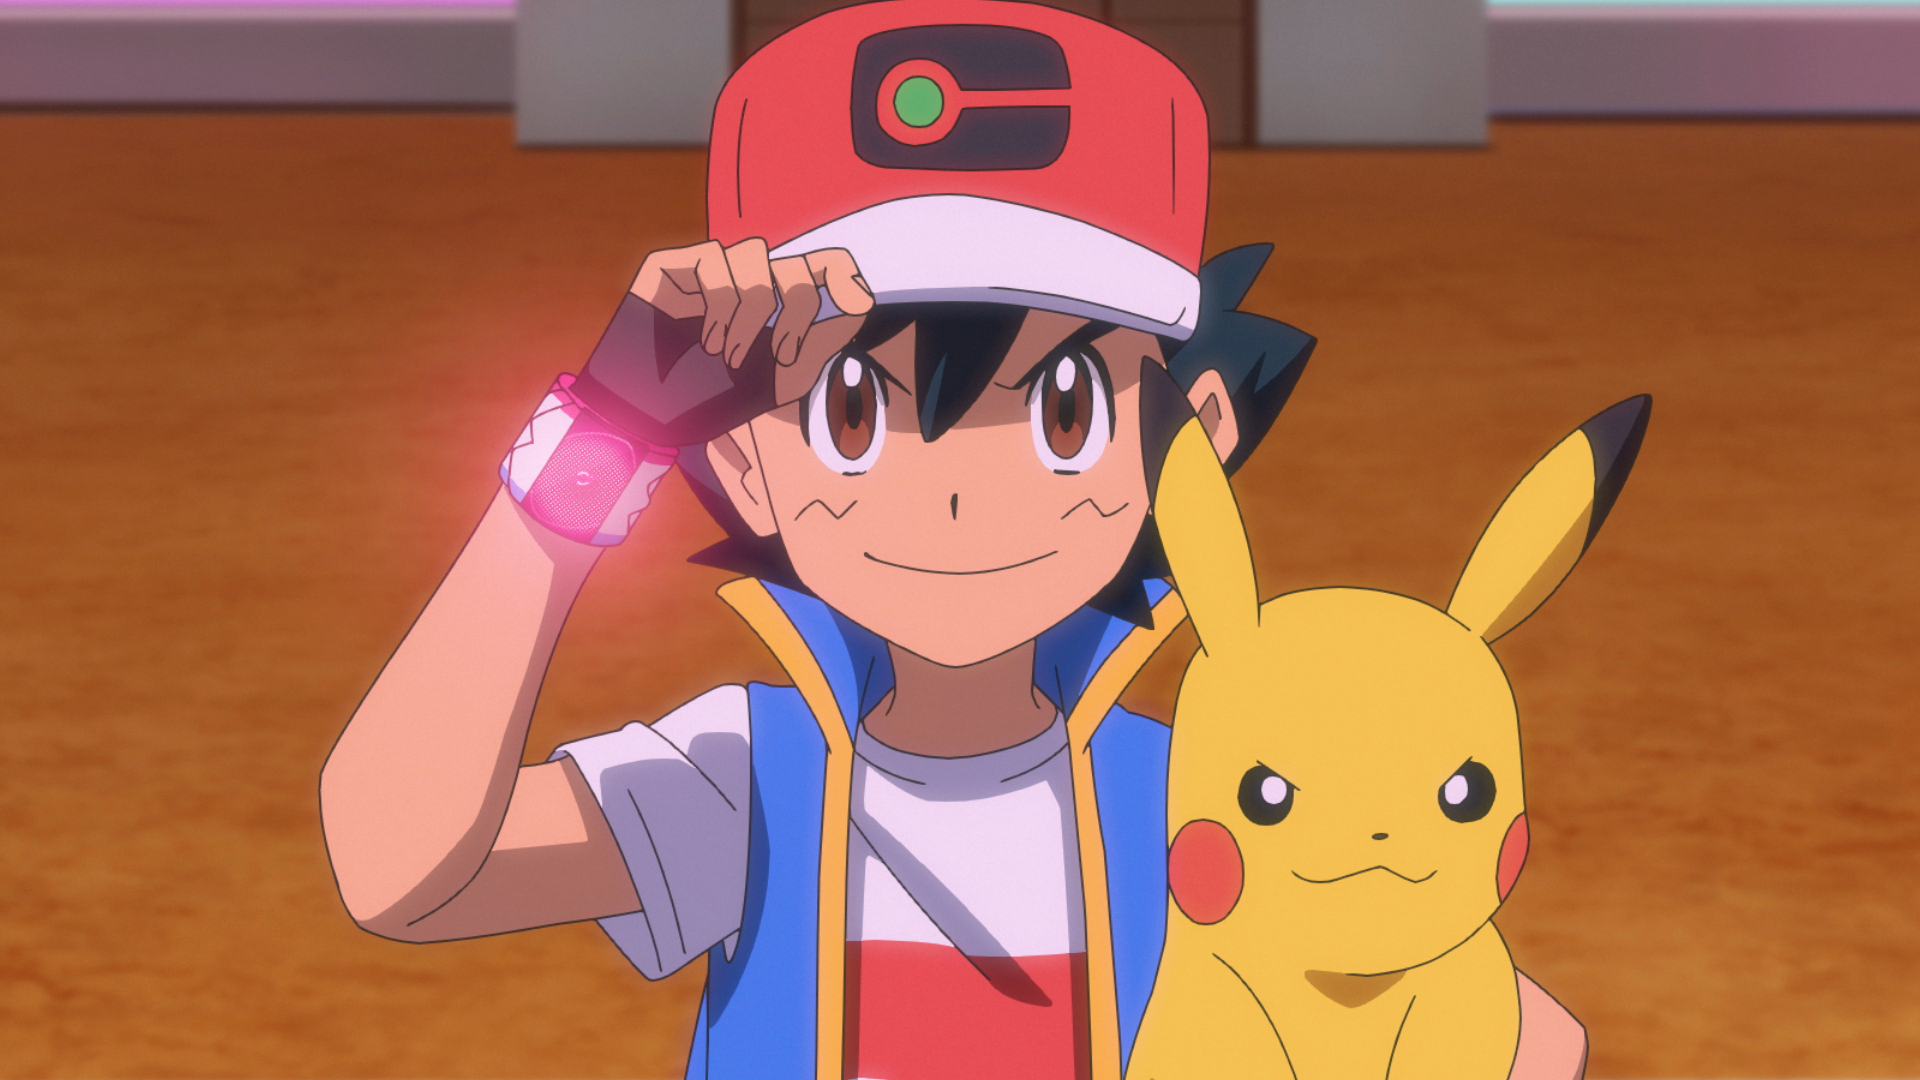 Ash Ketchum, yes he is doing Red's pose and I did copy it : r/pokemon